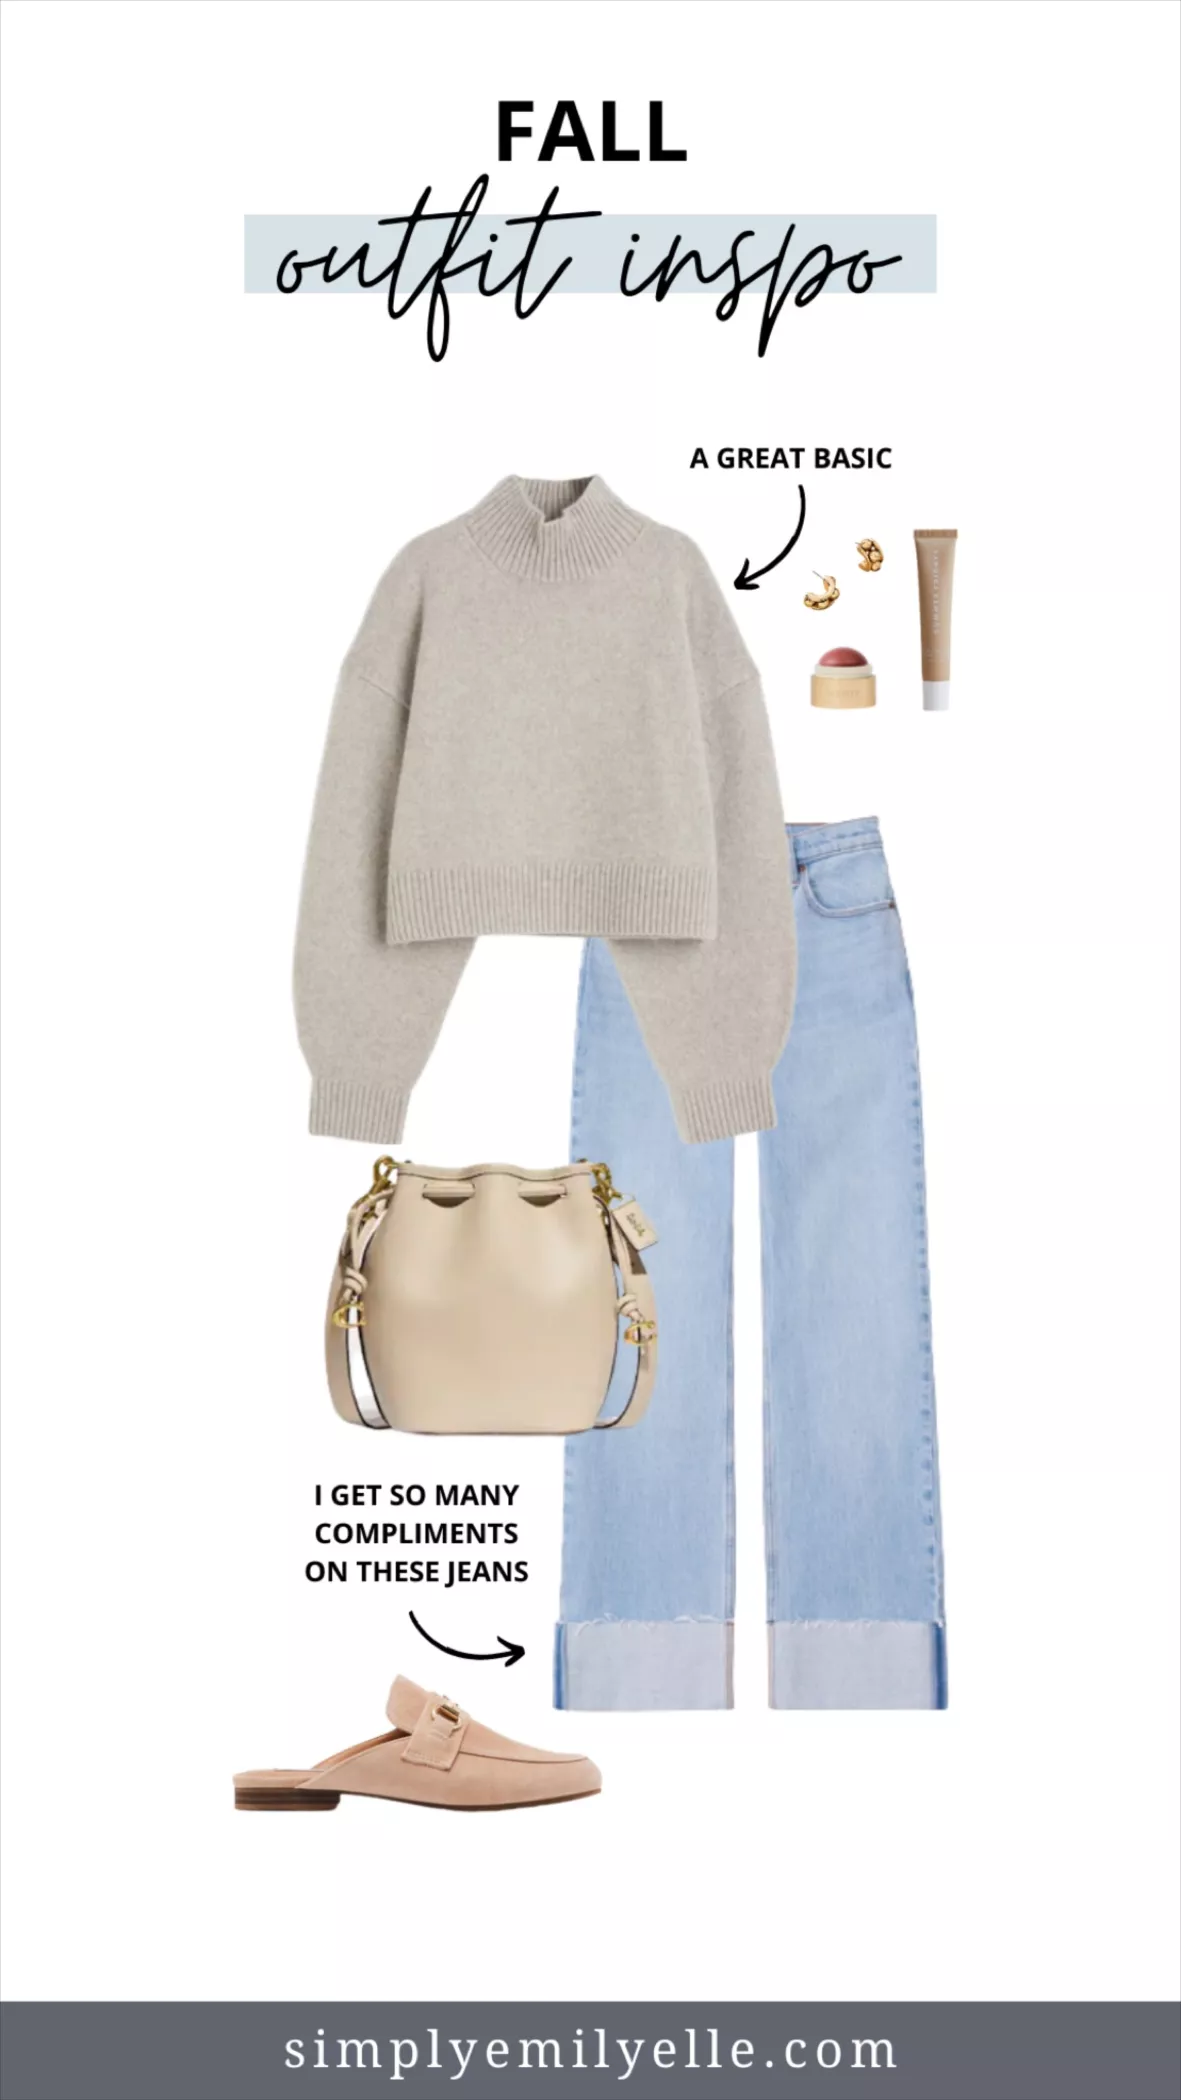 Trendy Outfit Ideas  Trendy fall outfits, Casual outfits, Stylish outfits